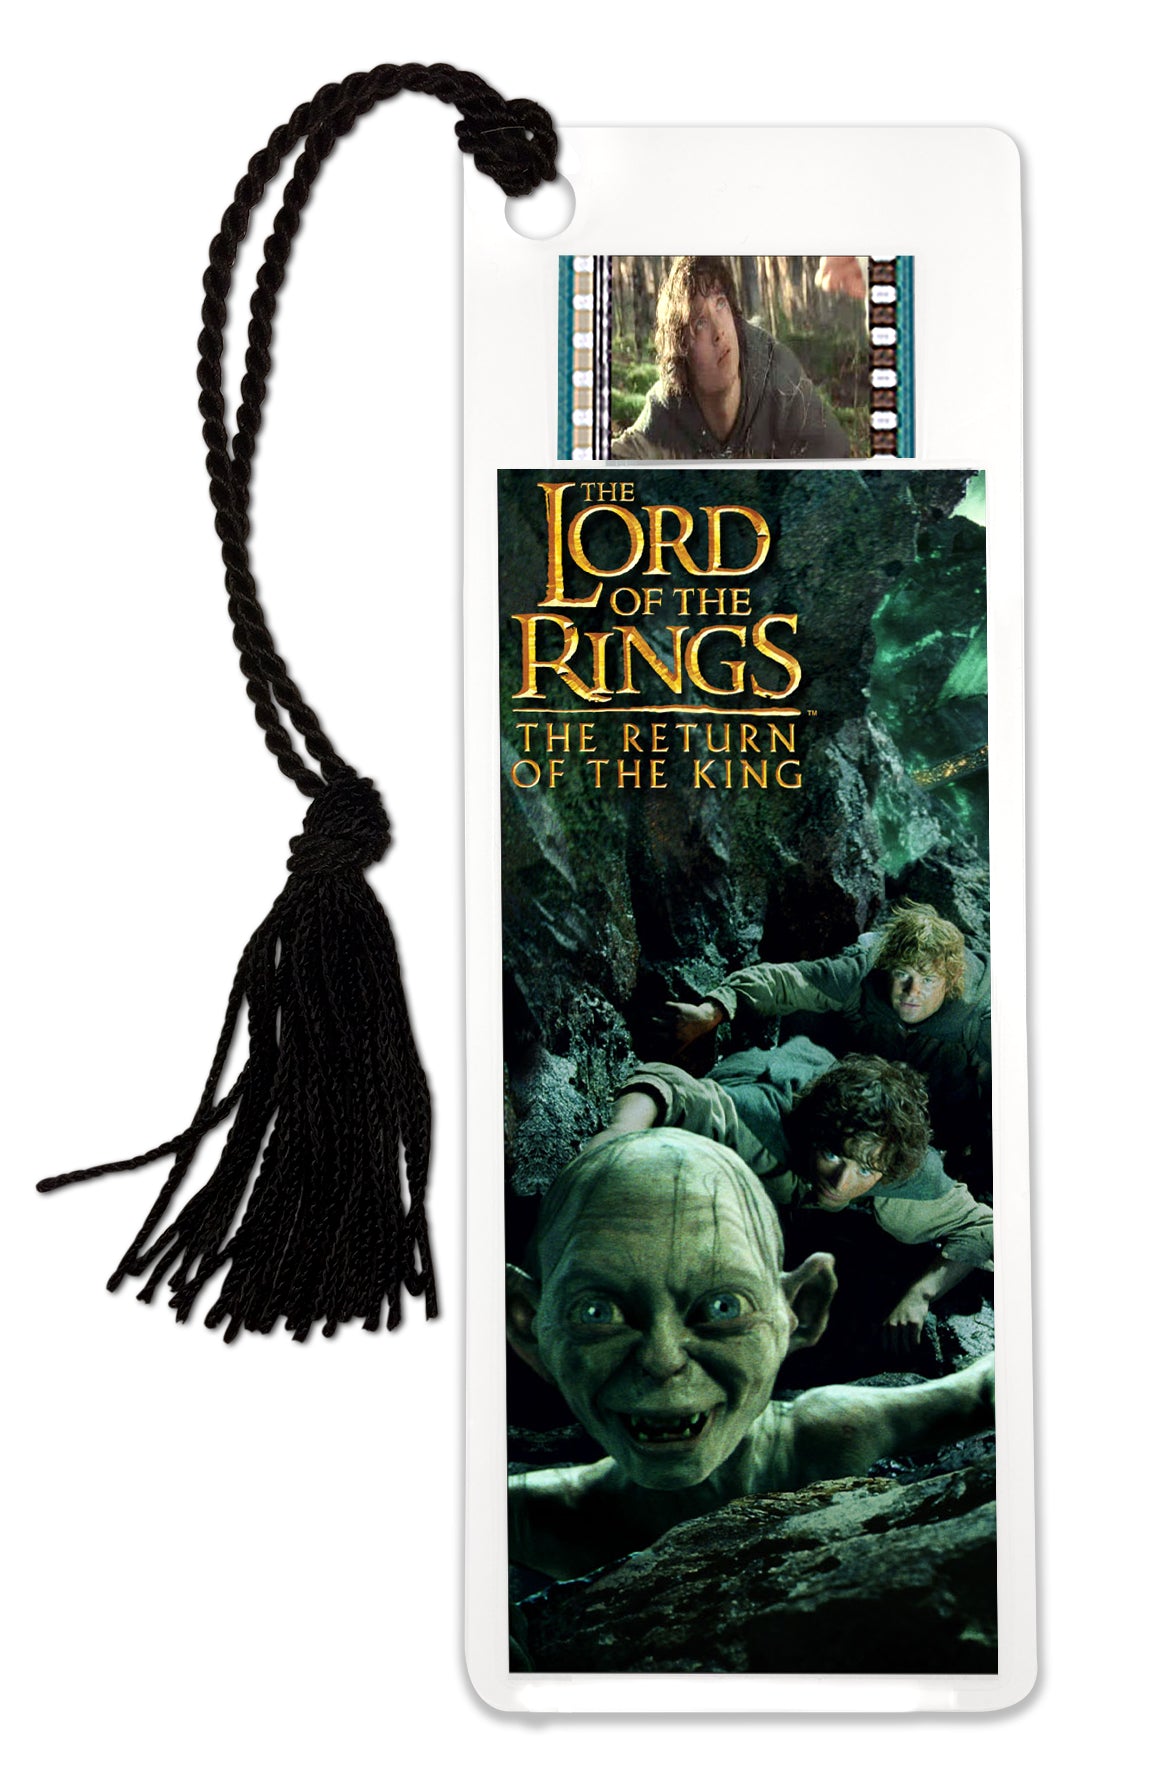 The Lord of the Rings: The Return of the King (Gollum) FilmCells™ Bookmark USBM600